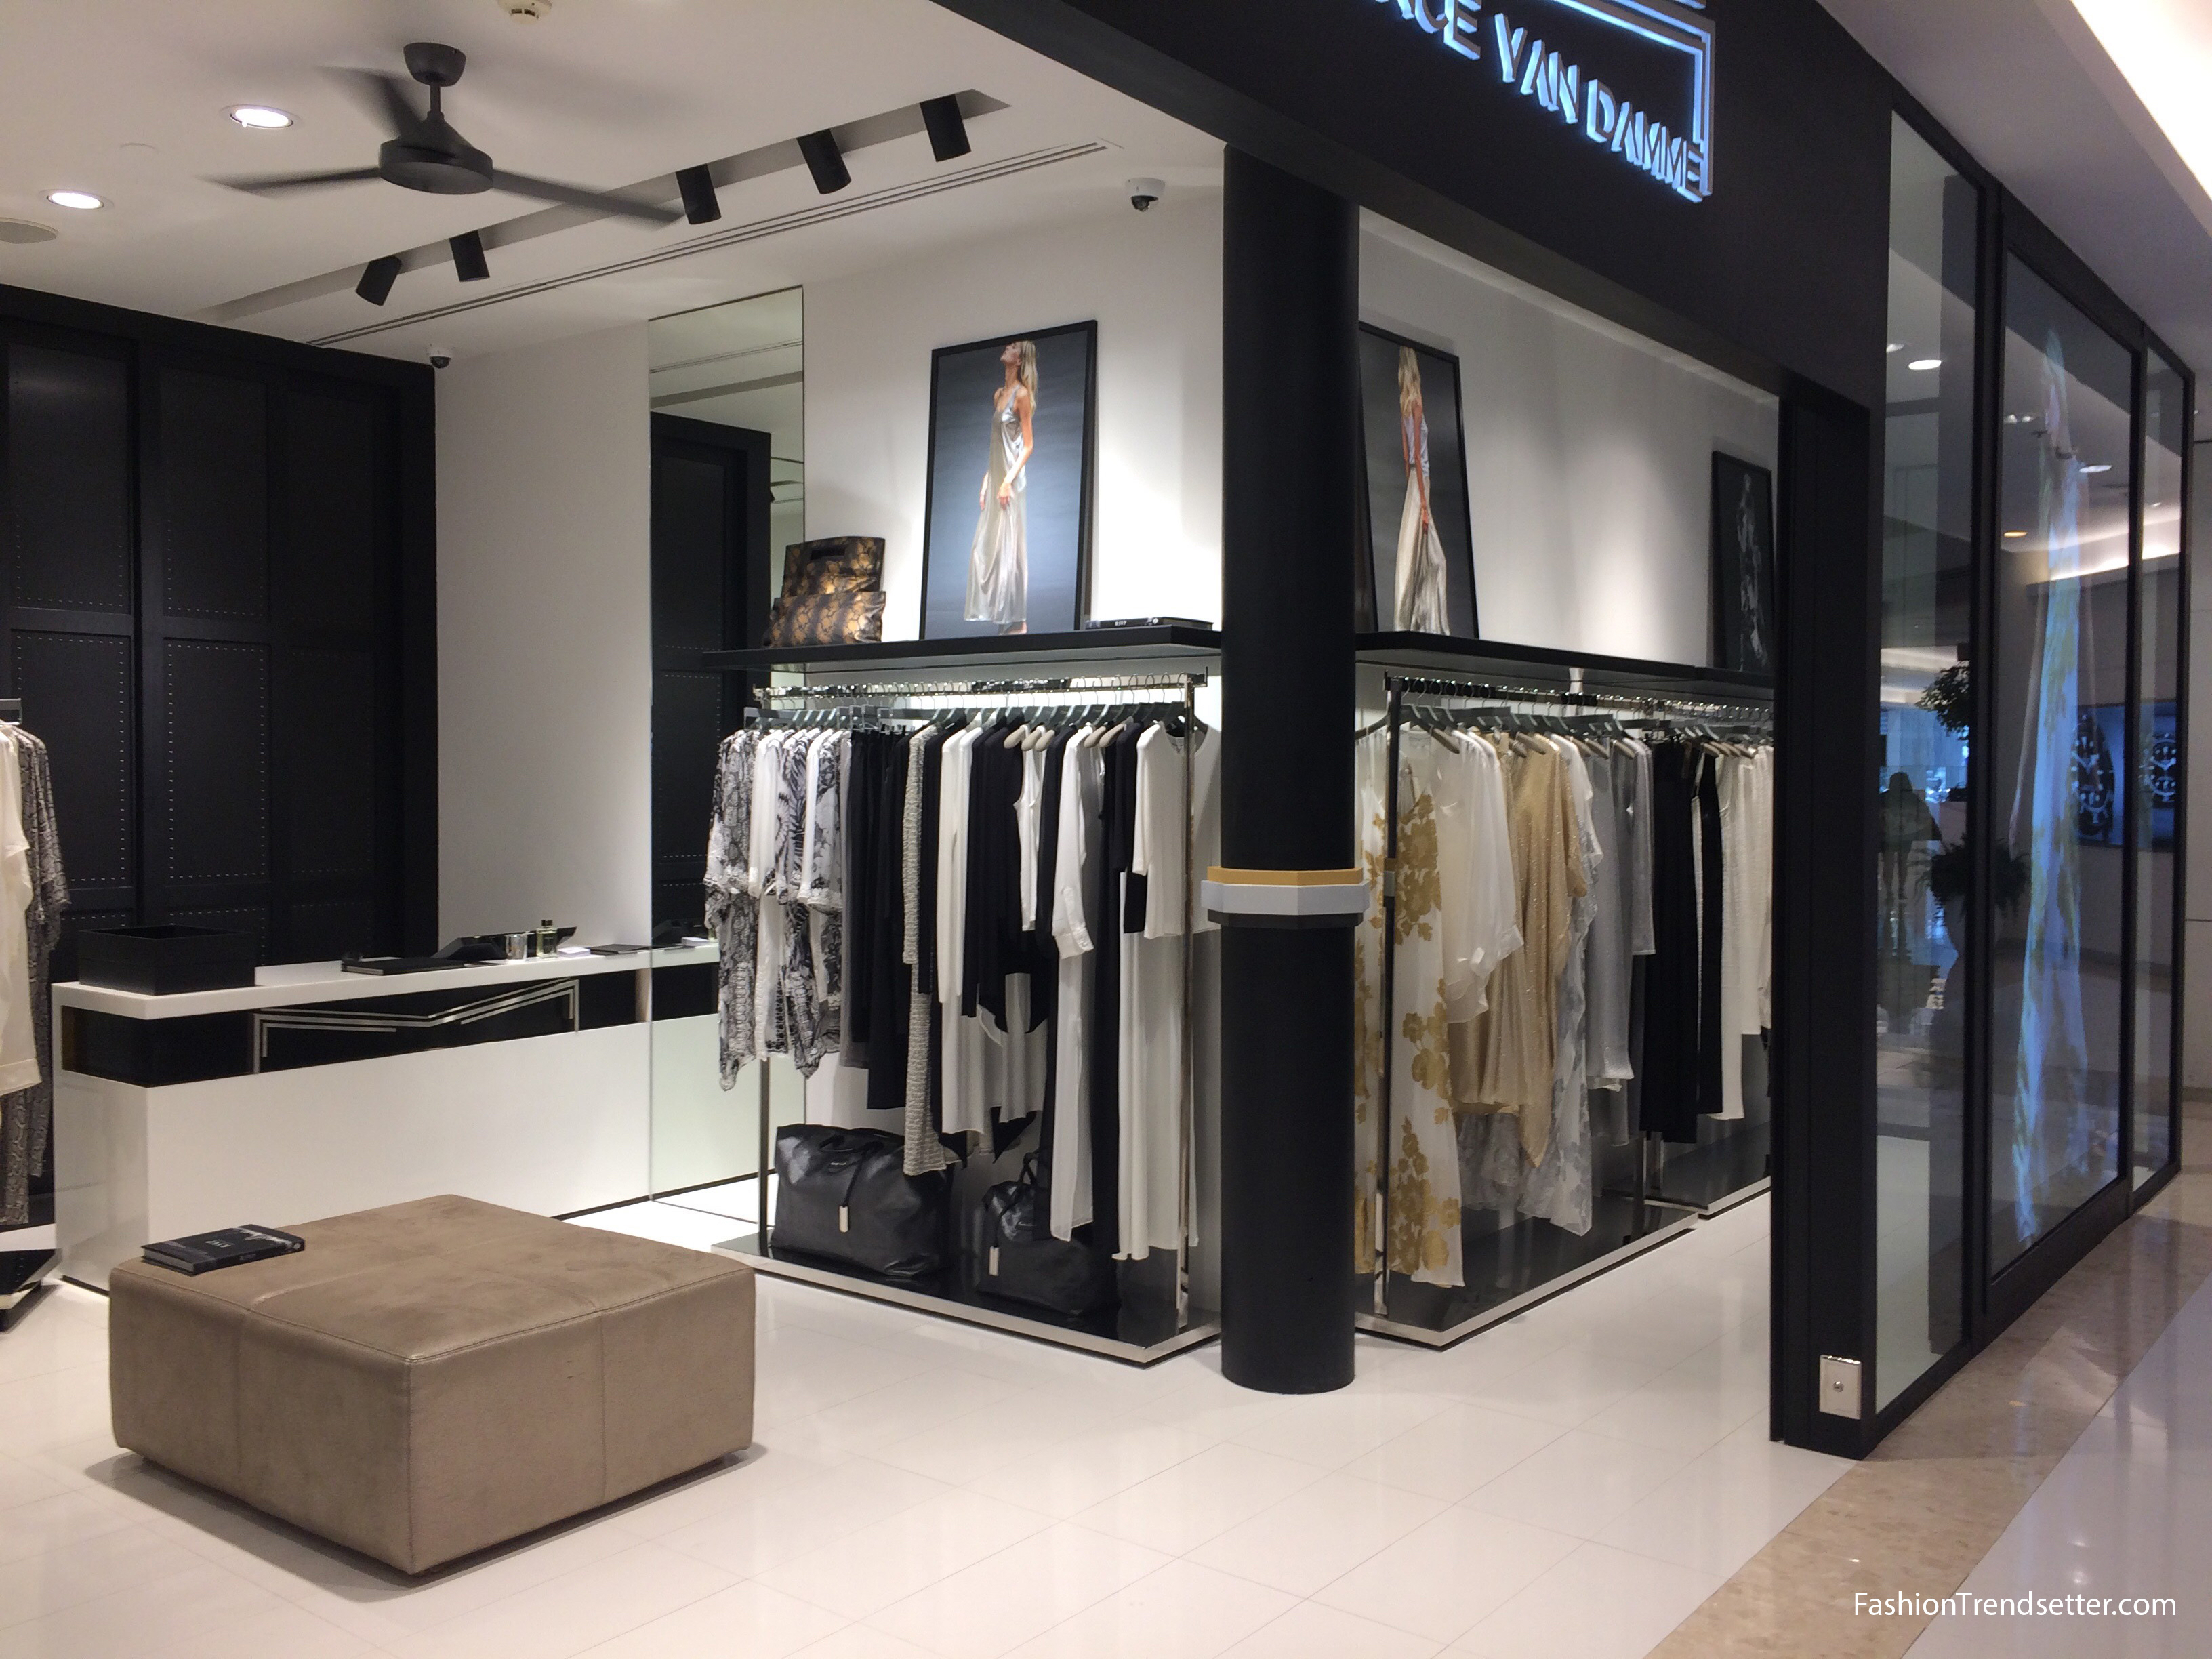 Marie France Van Damme's New Boutique in Bangkok’s Exclusive Gaysorn Village